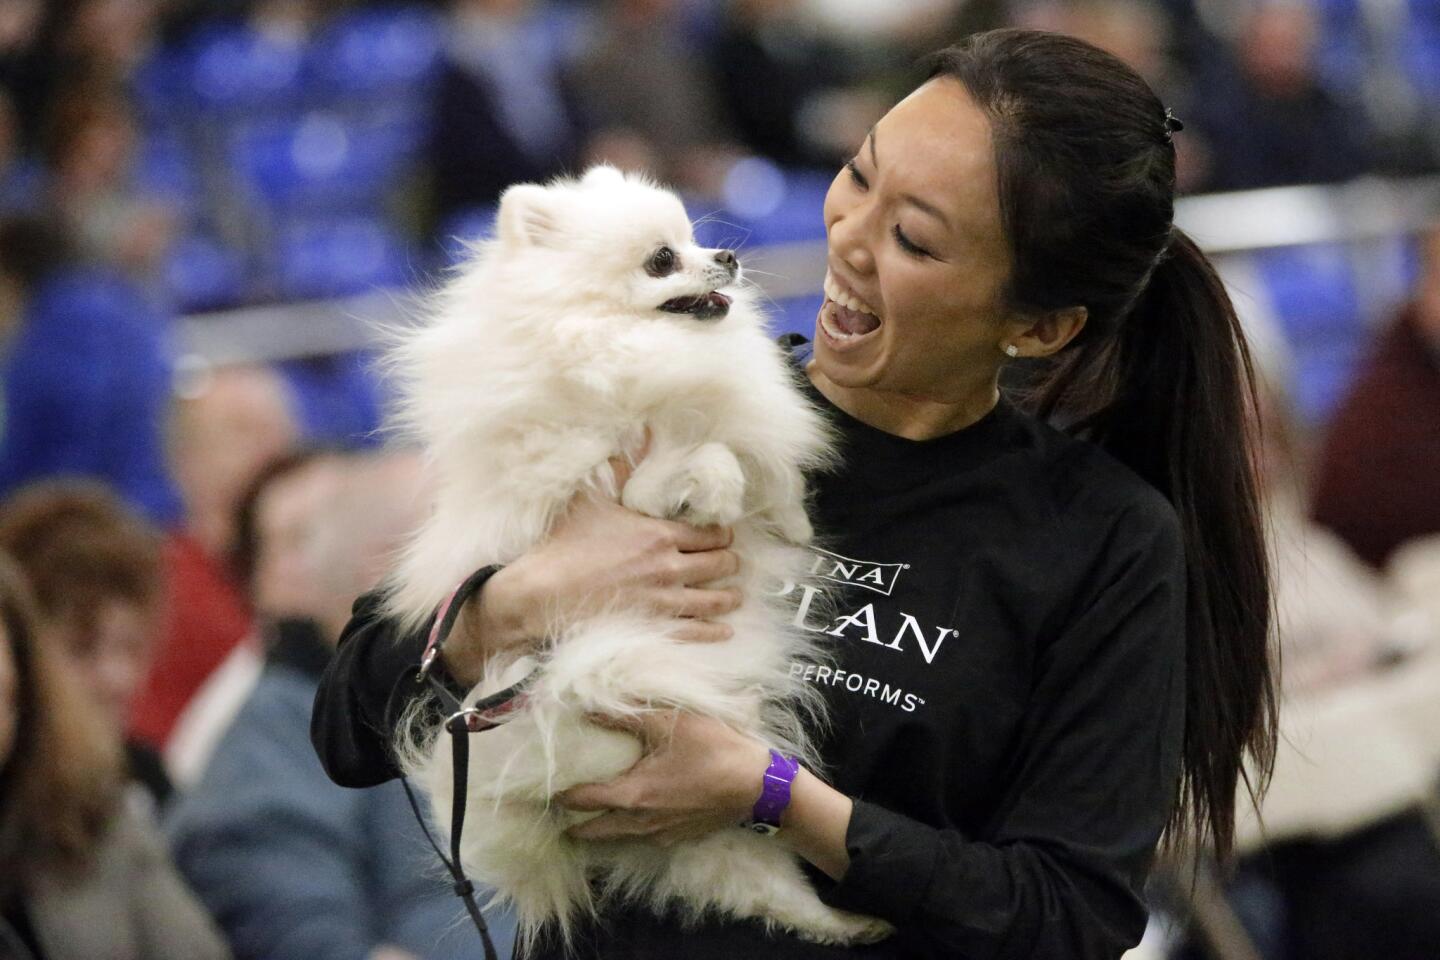 Wendy Lu of San Jose hugs her Pomeranian Daisy while competing in the Westminster Kennel Club Masters Agility Championship in New York. Daisy made it to the 50-dog final round.